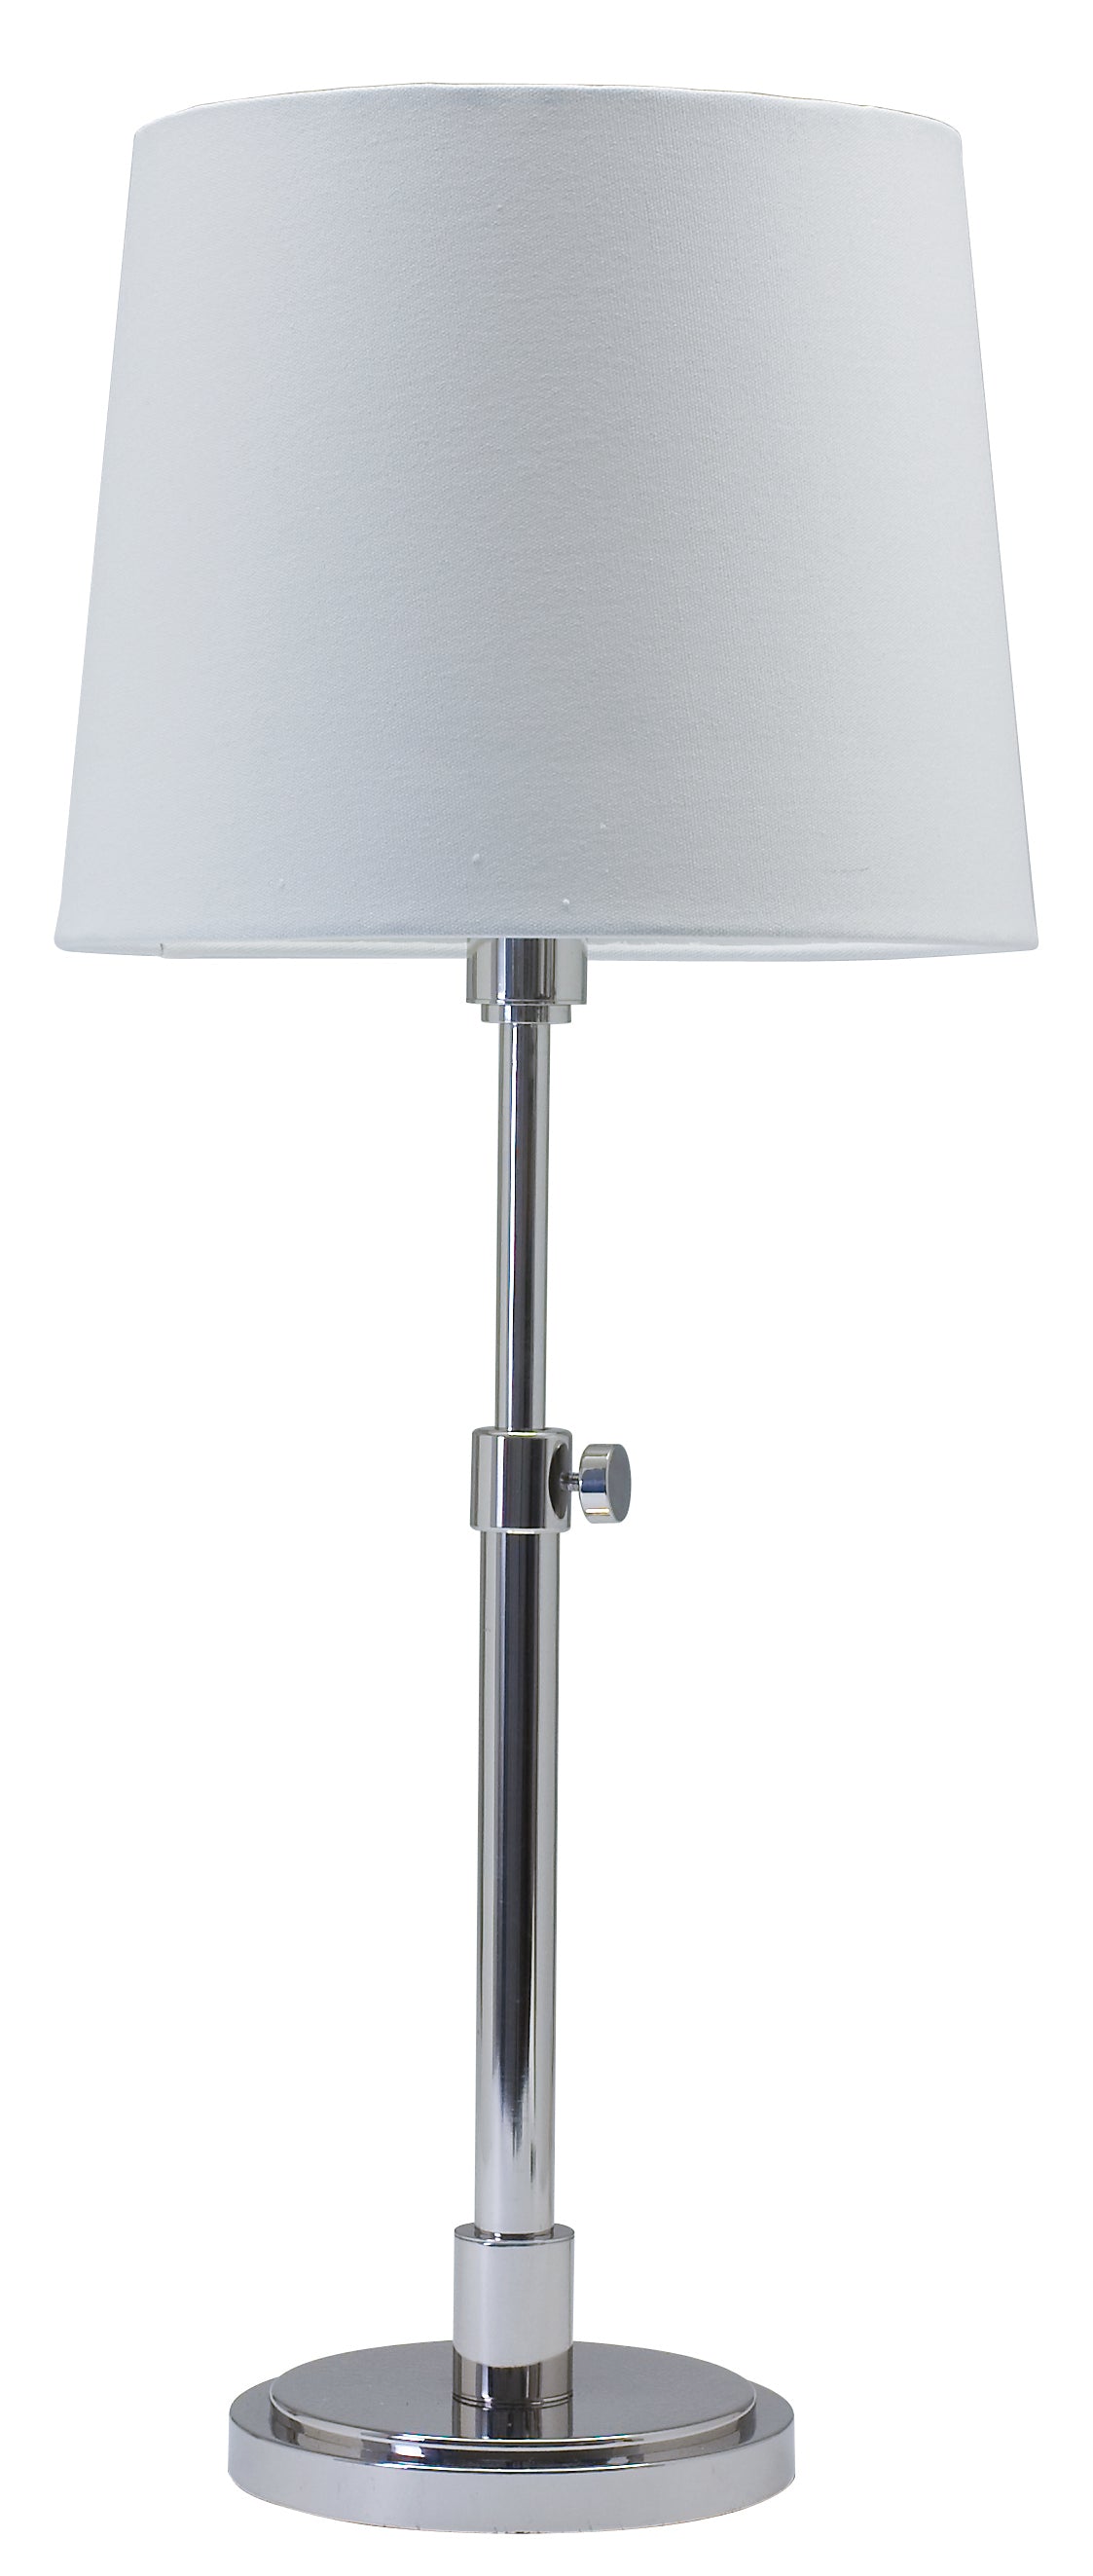 House of Troy Townhouse Adjustable Table Lamp in Polished Nickel TH750-PN